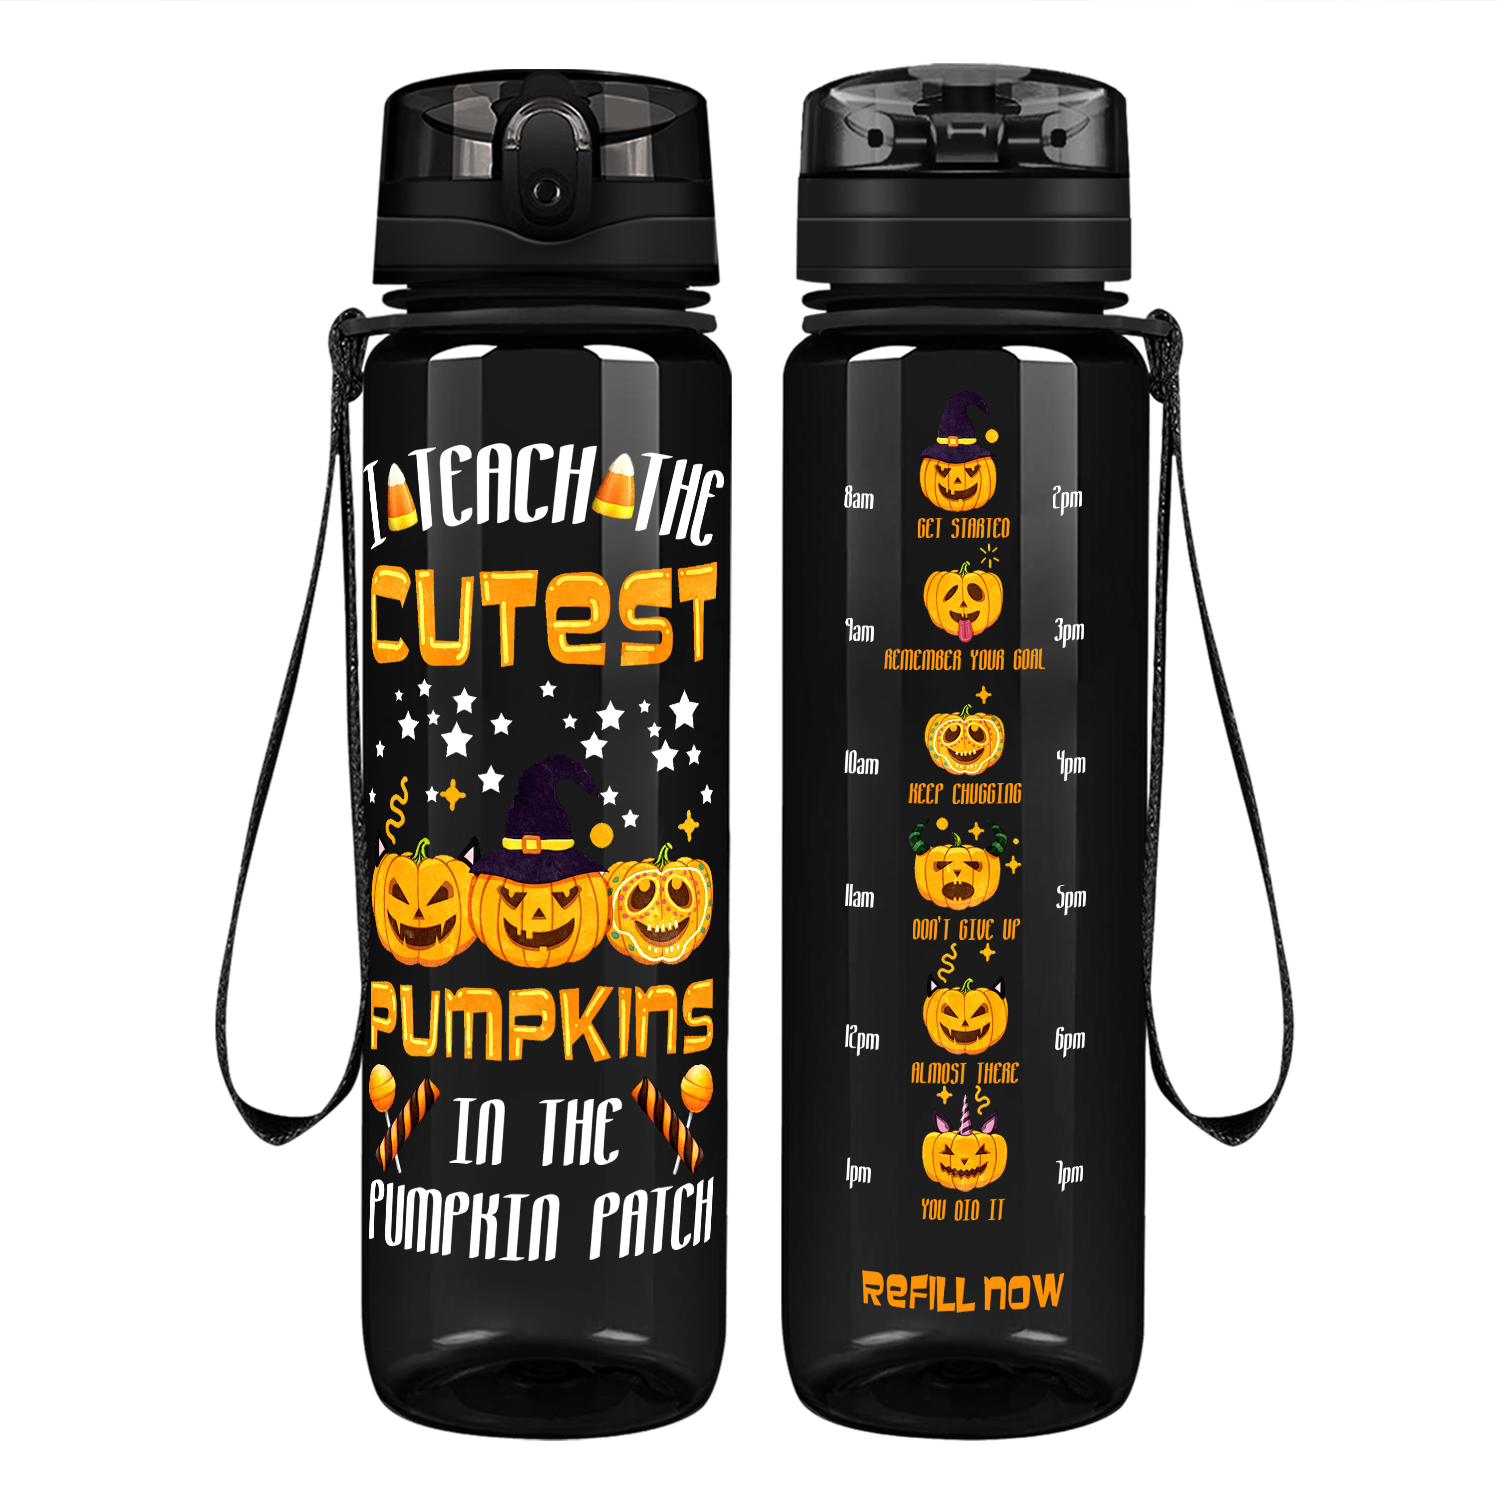 I Teach the Cutest Pumpkins in the Pumpkin Patch on 32 oz Motivational Tracking Water Bottle